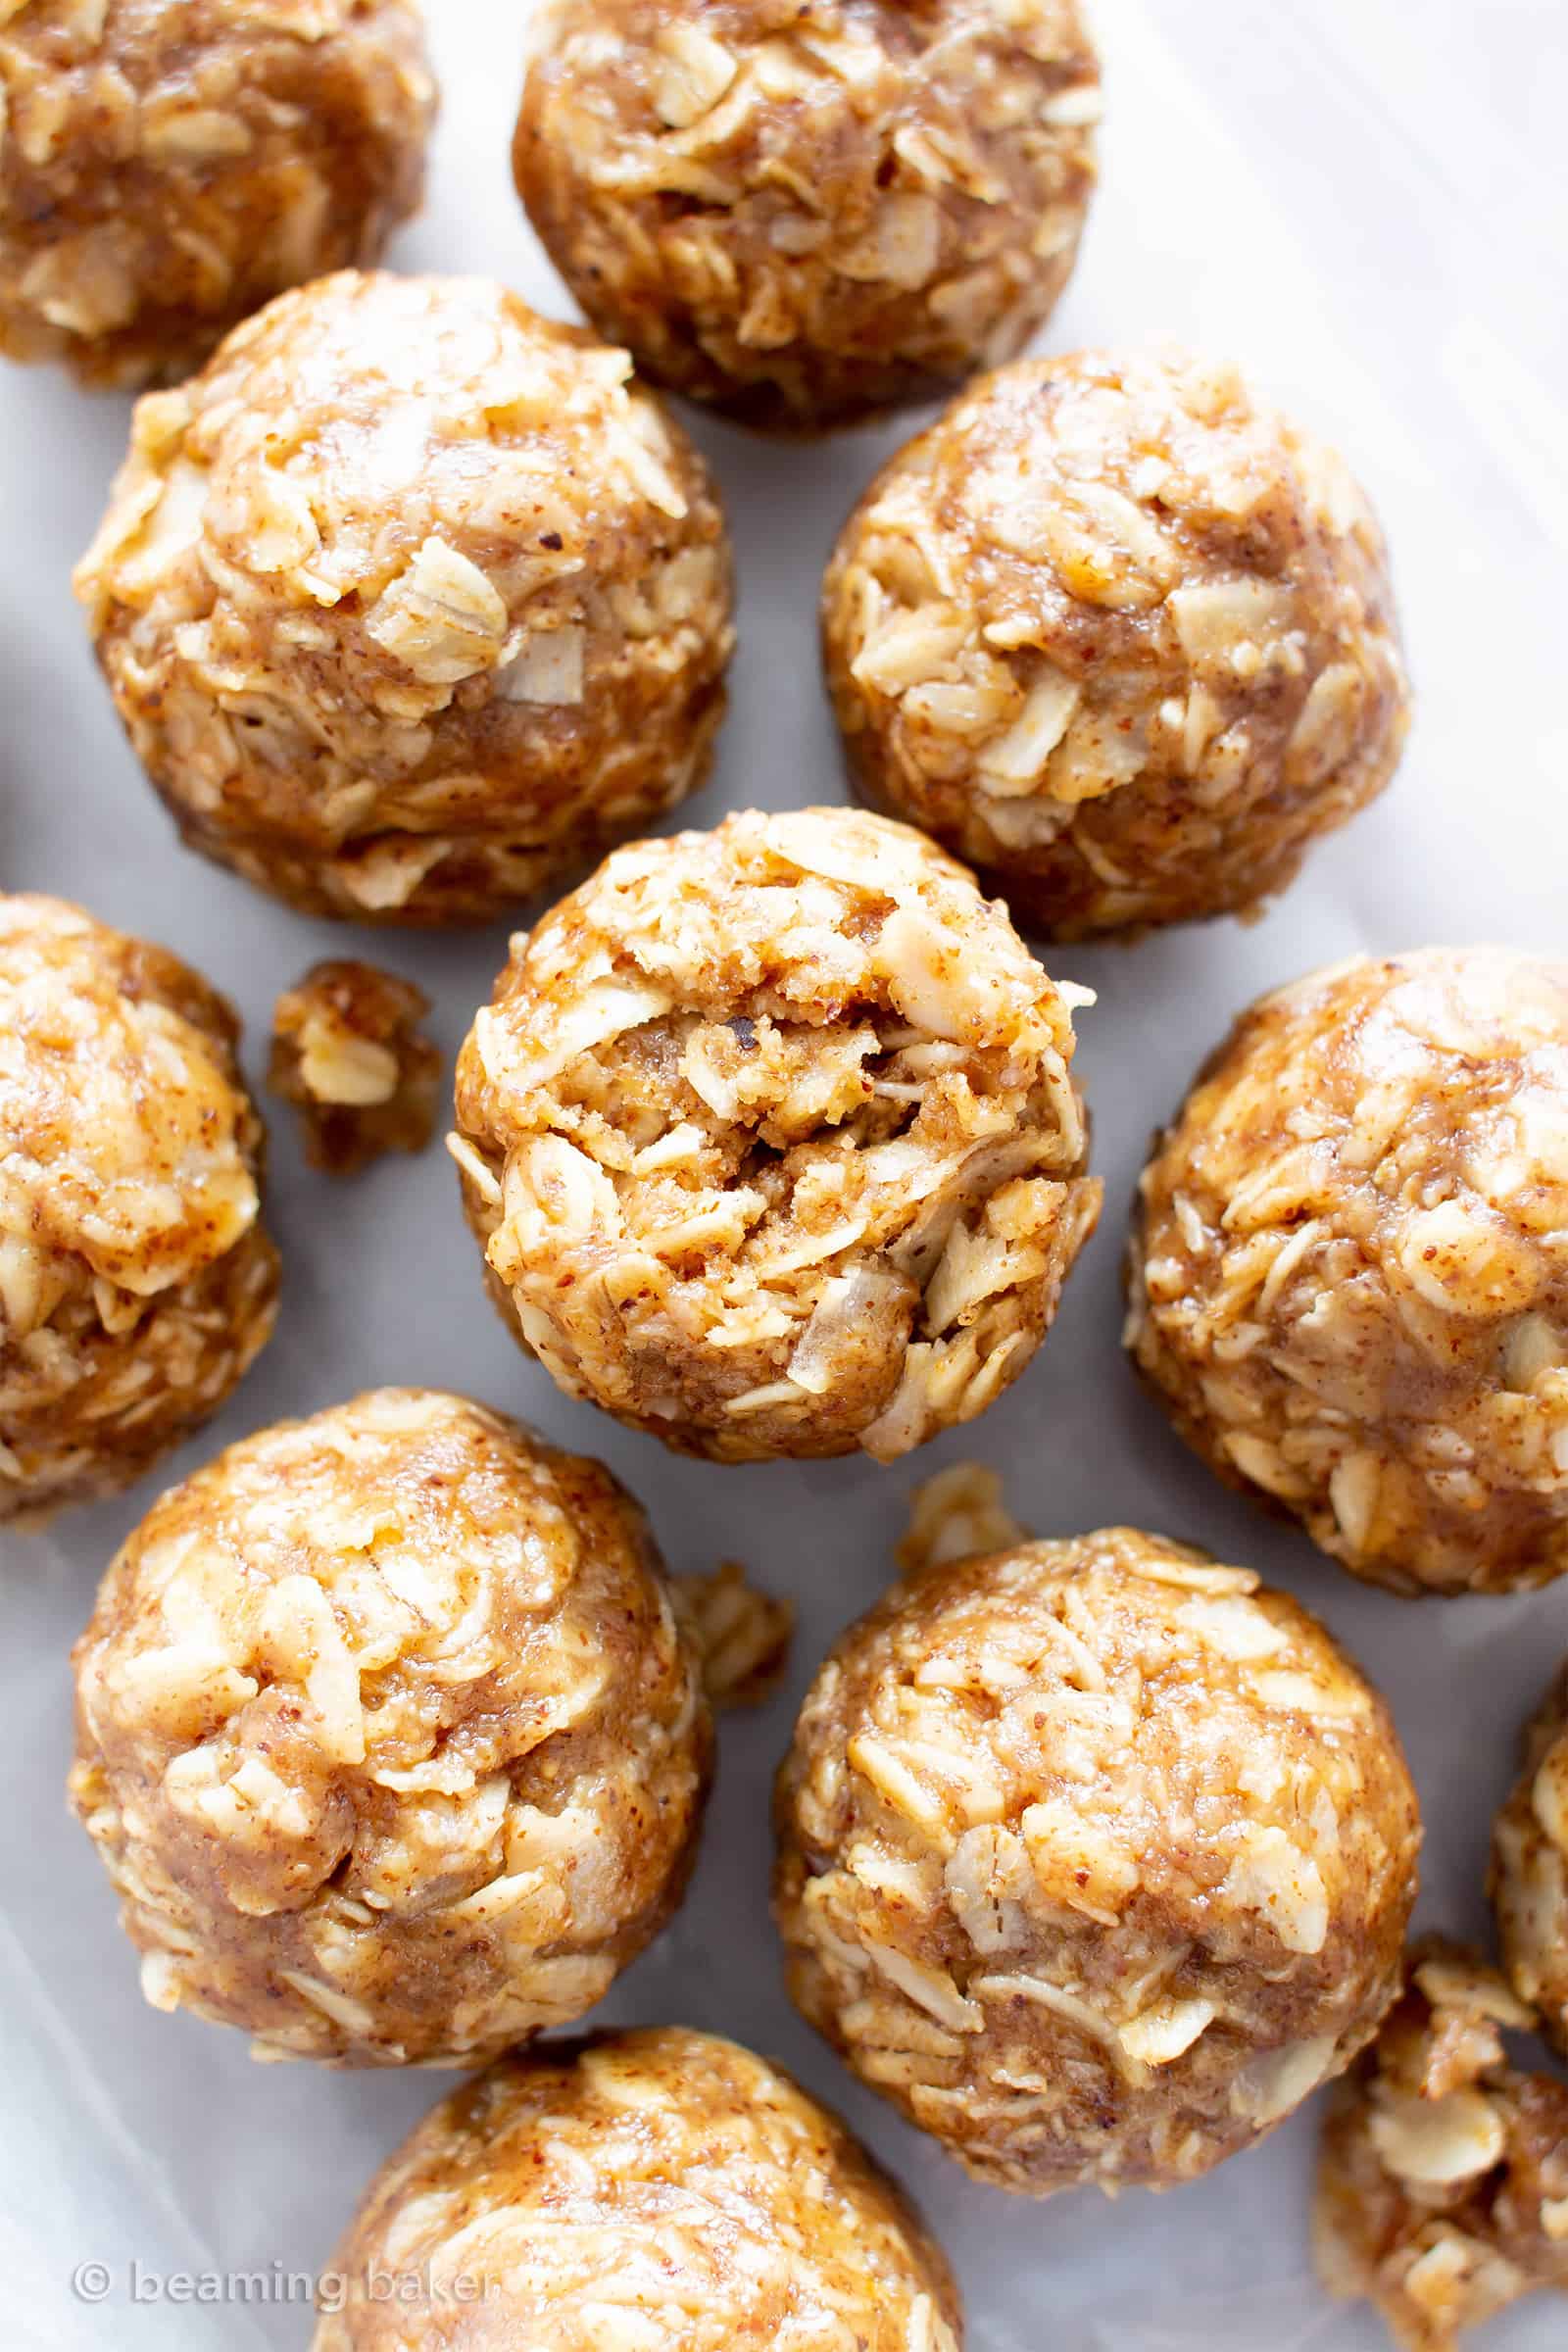 4 Ingredient No Bake Almond Butter Coconut Energy Bites (V, GF): an easy ‘n healthy recipe for deliciously chewy protein-rich energy bites made with nutrient-rich almond butter and coconut! #GlutenFree, #Vegan #DairyFree #OneBowl #HealthySnacks #AlmondButter #NoBake #NoBakeBites #ProteinPacked #Snacks | Recipe on BeamingBaker.com